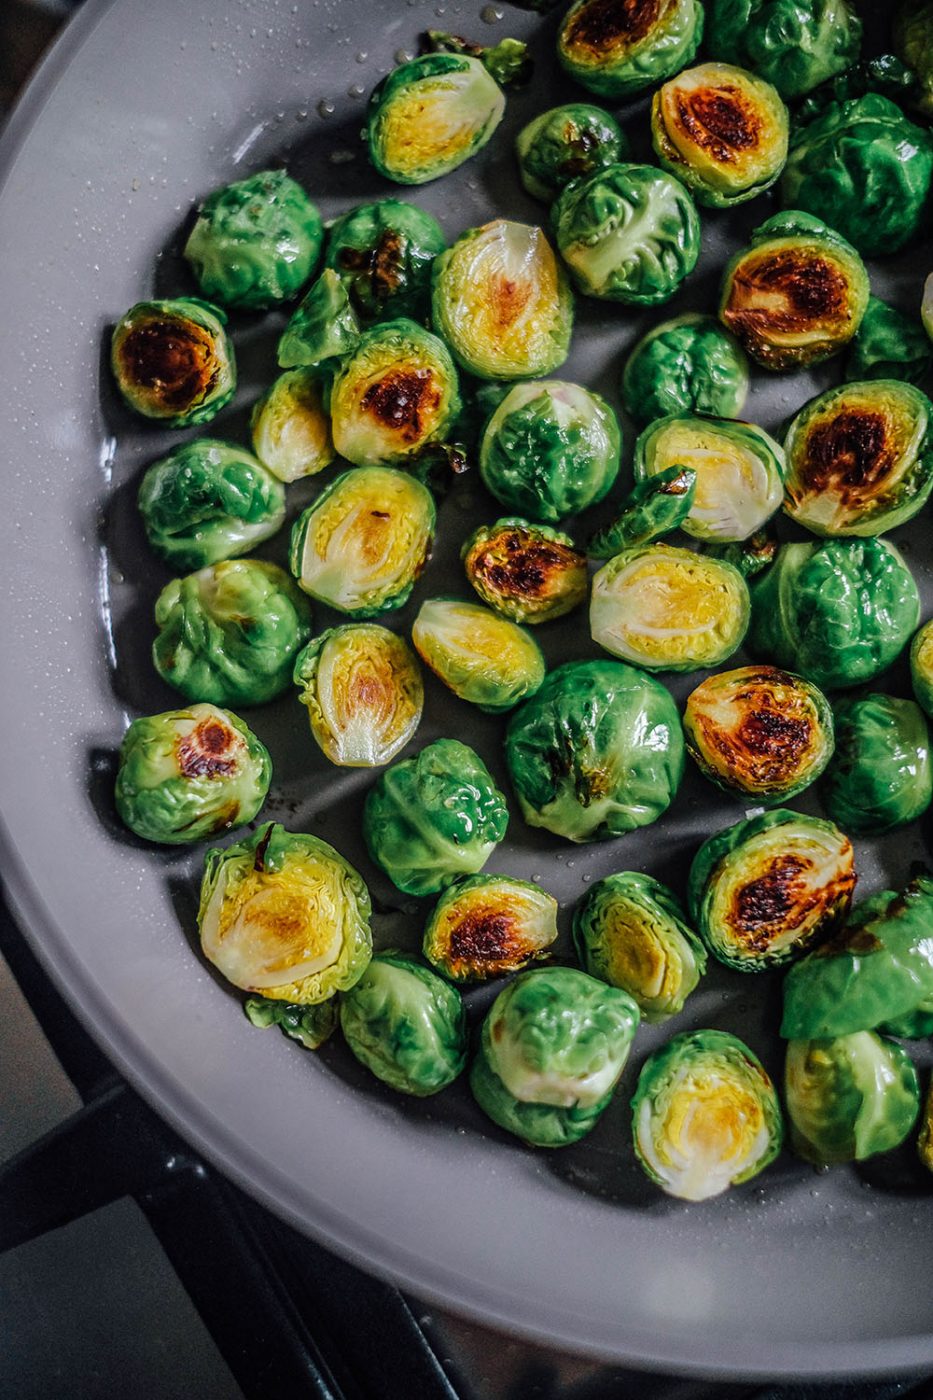 Gluten-free gnocchi with Brussel Sprouts